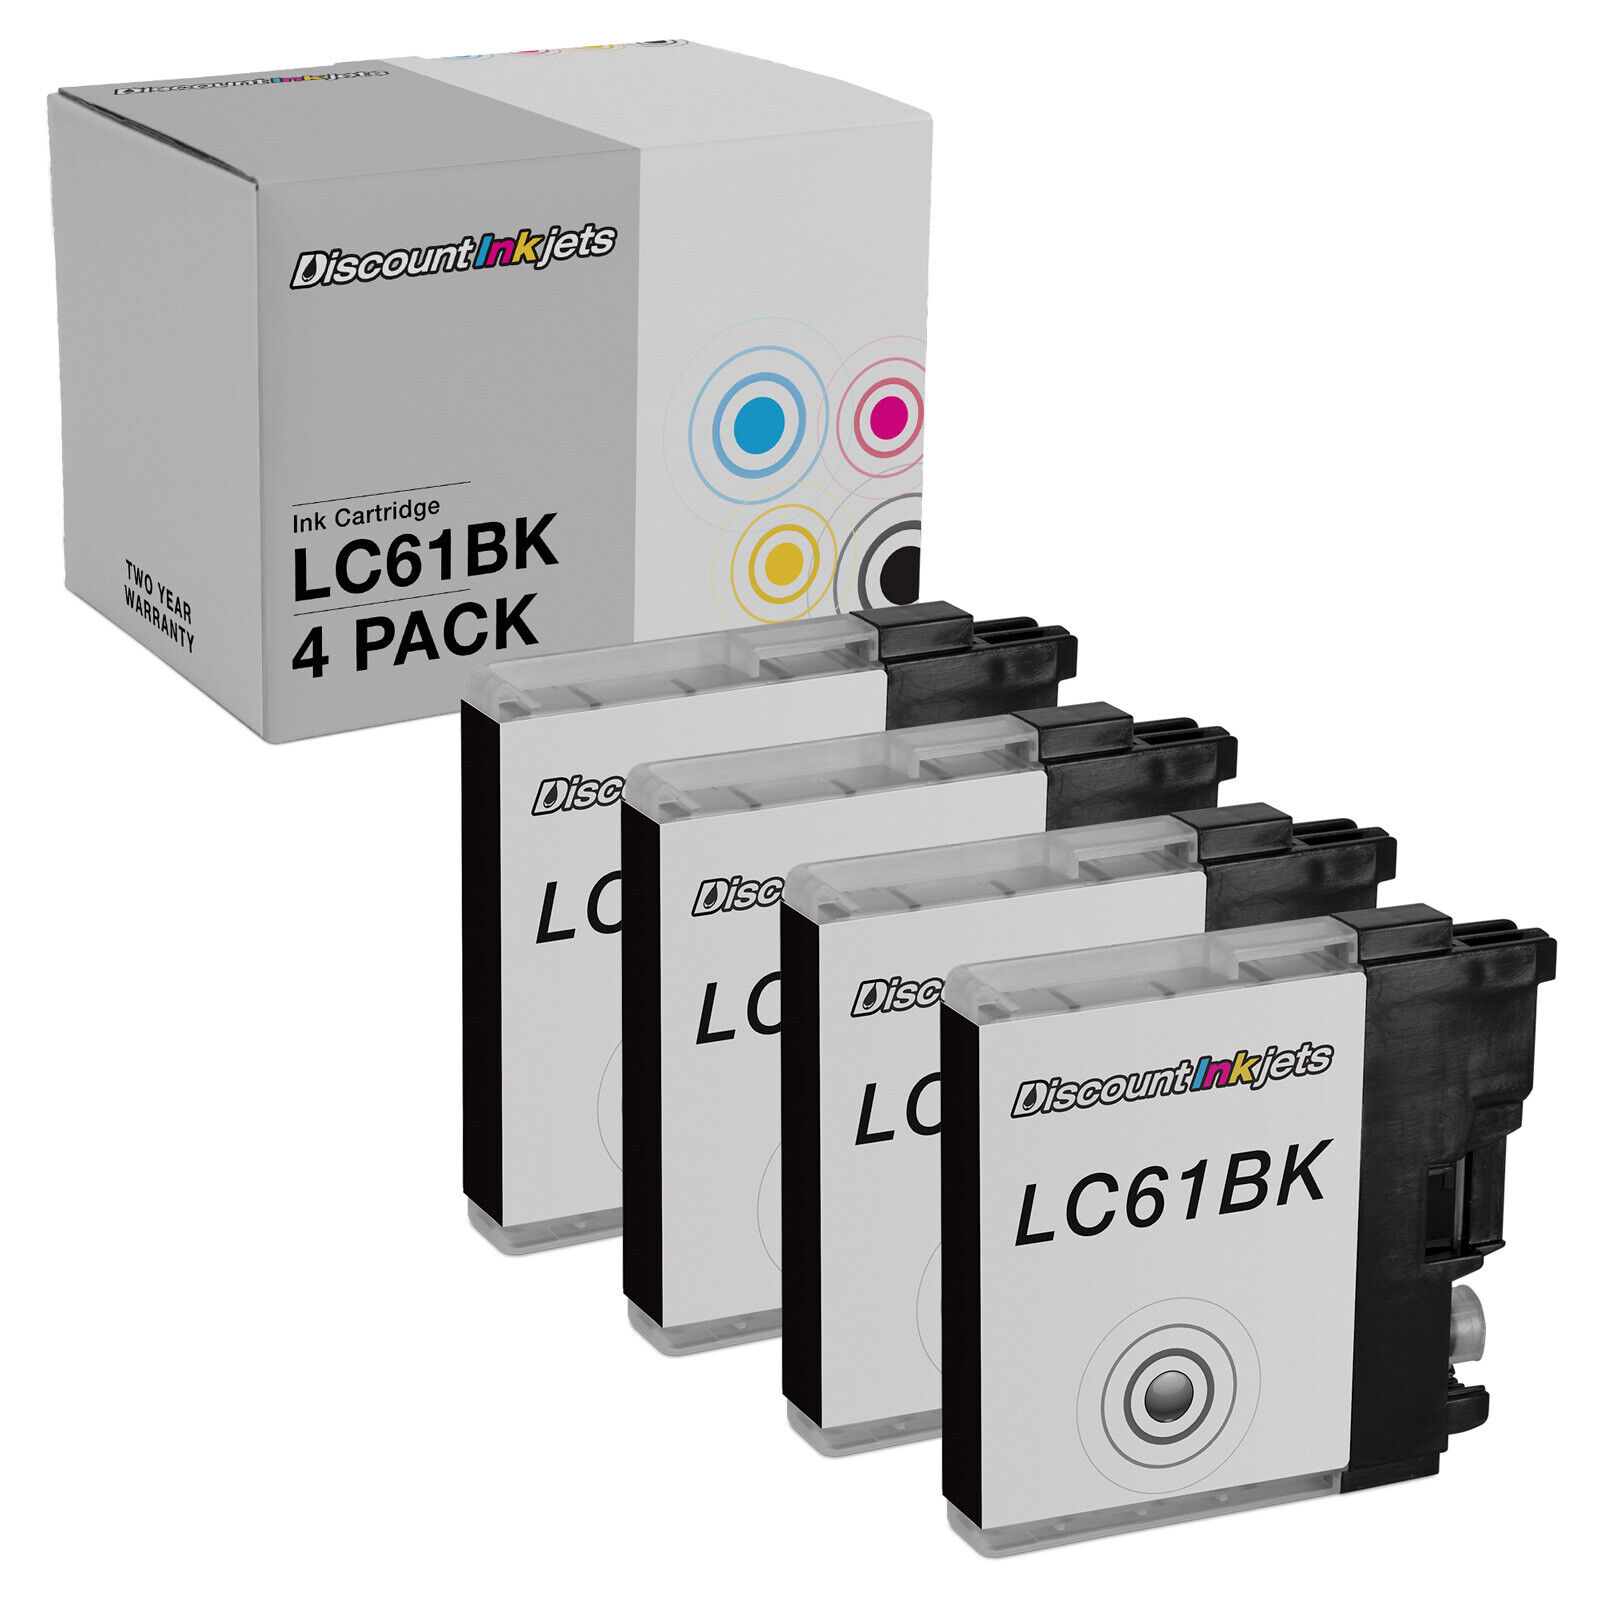 4pk LC61BK LC61 BLACK Ink Print Cartridge for Brother mfc-5895cw mfc-j415w j615w